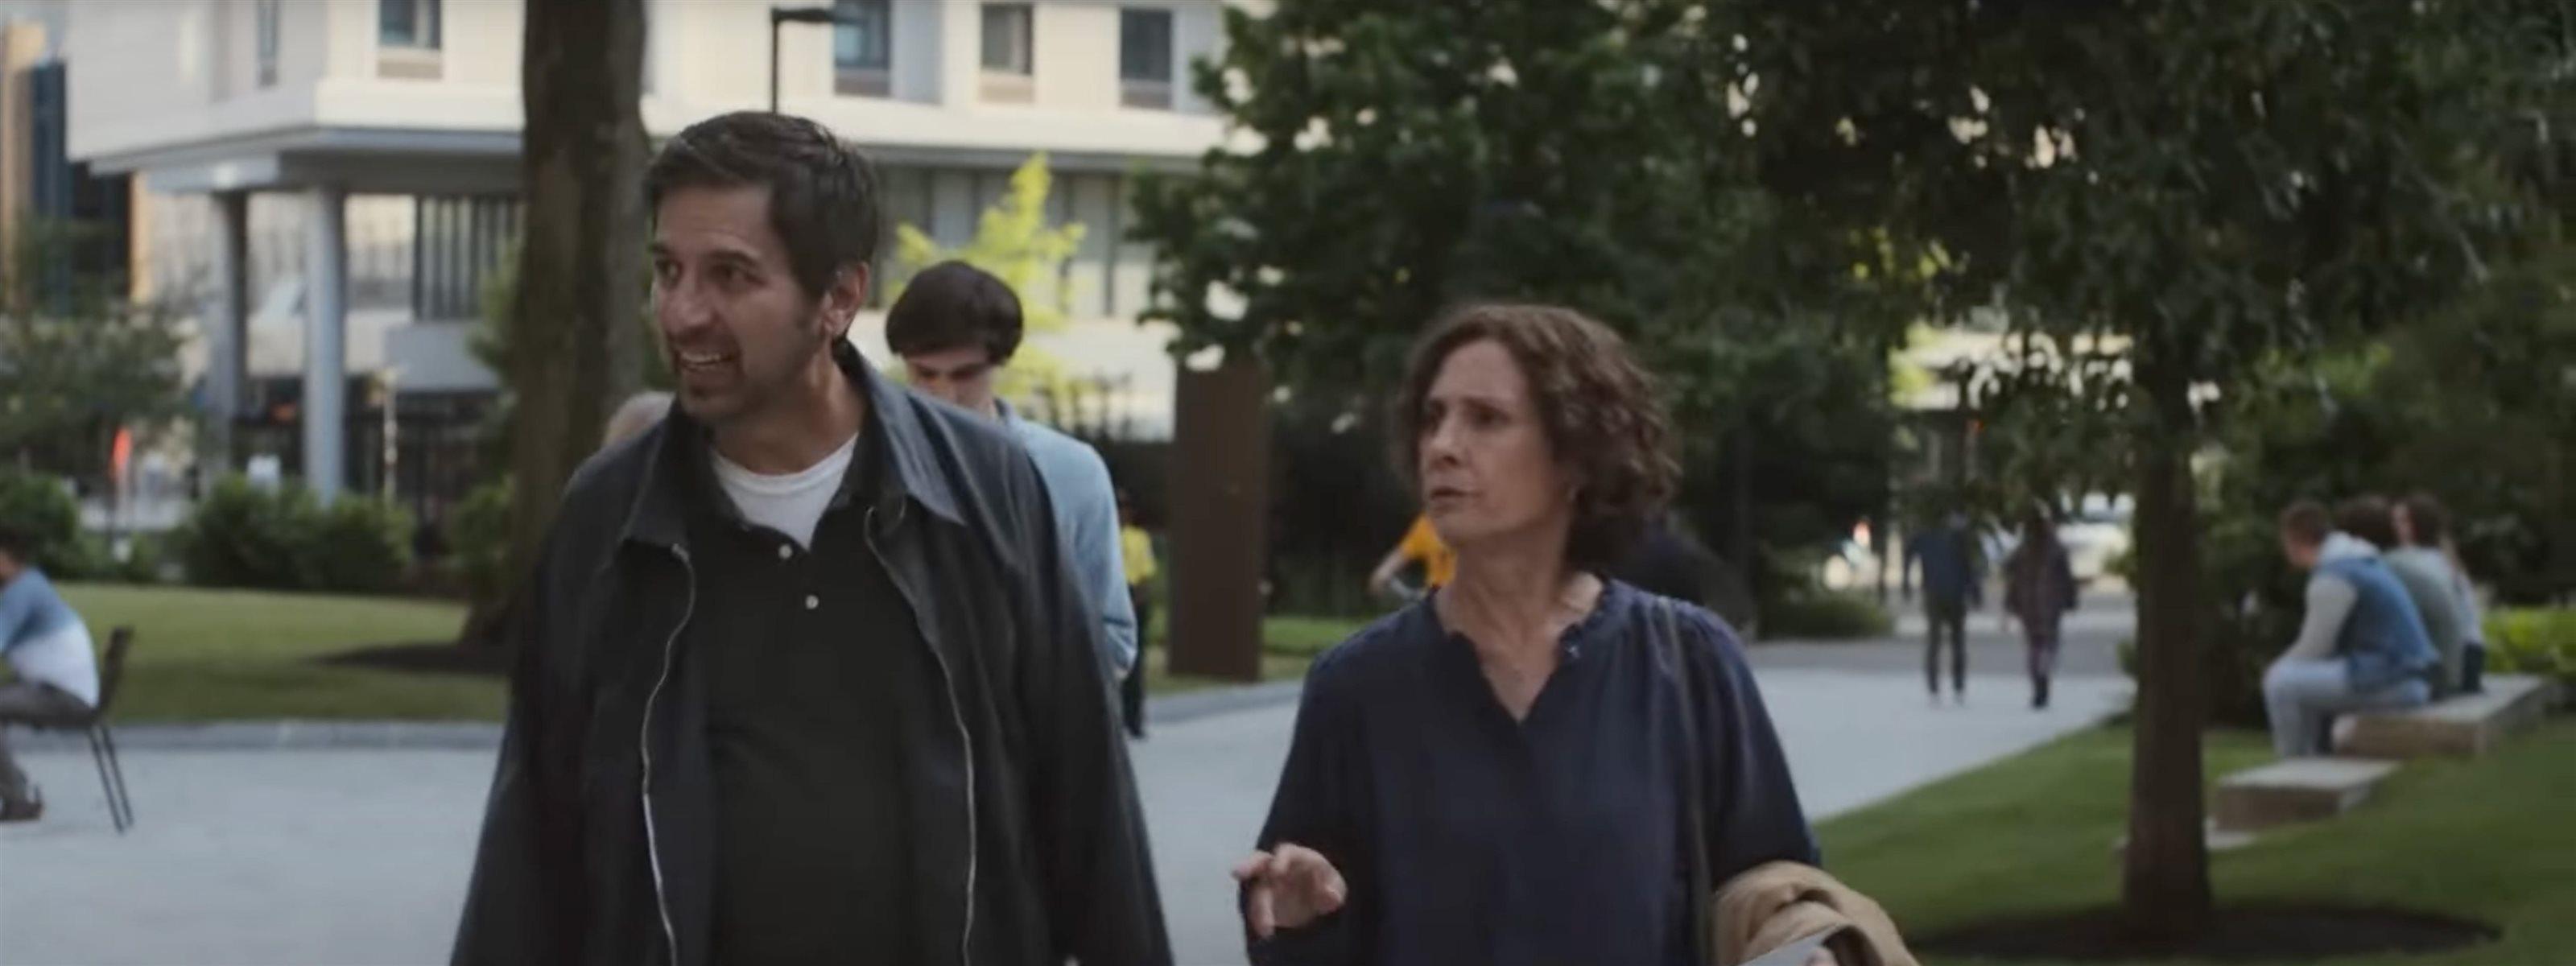 Drexel&#39;s Korman Family Quad and Chestnut Square can be seen in the trailer alongside Ray Romano, Laurie Metcalf and Jacob Ward. Screenshot from the trailer to “Somewhere in Queens.” Directed by Ray Romano. Roadside Attractions, Lionsgate Films. 2023.